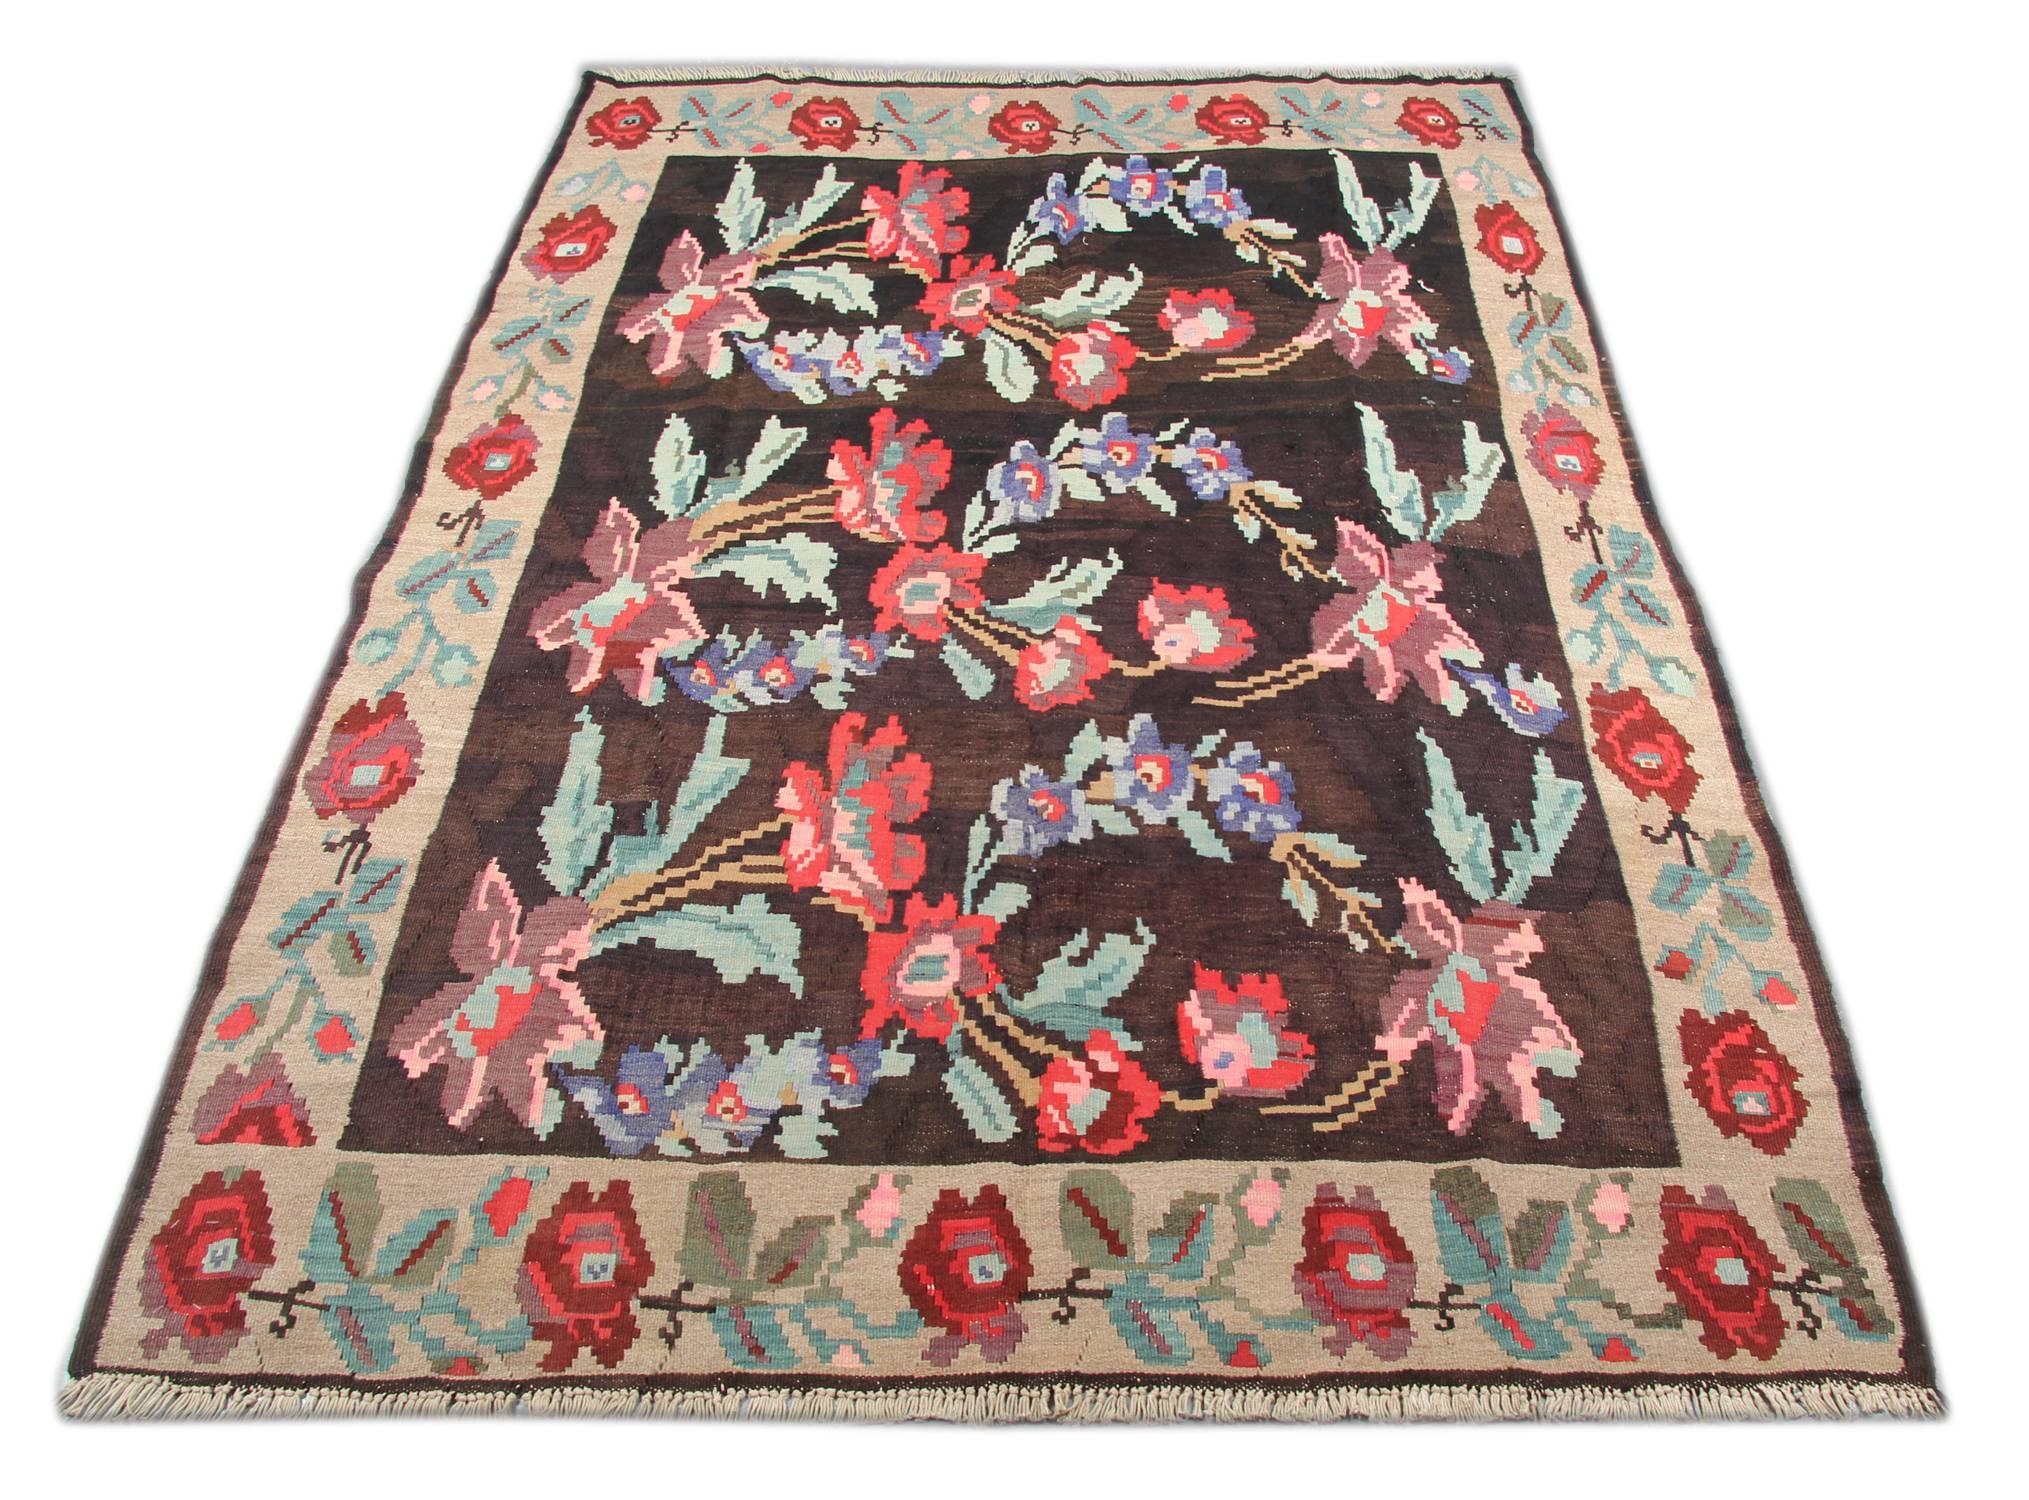 This oriental rug vintage Moldovian floral rug is from Romania, handwoven in, circa the 1920s which have used unusual color combinations. Torn between the influences of the Ottoman Empire to the south and Russian and Slavic countries to the north,